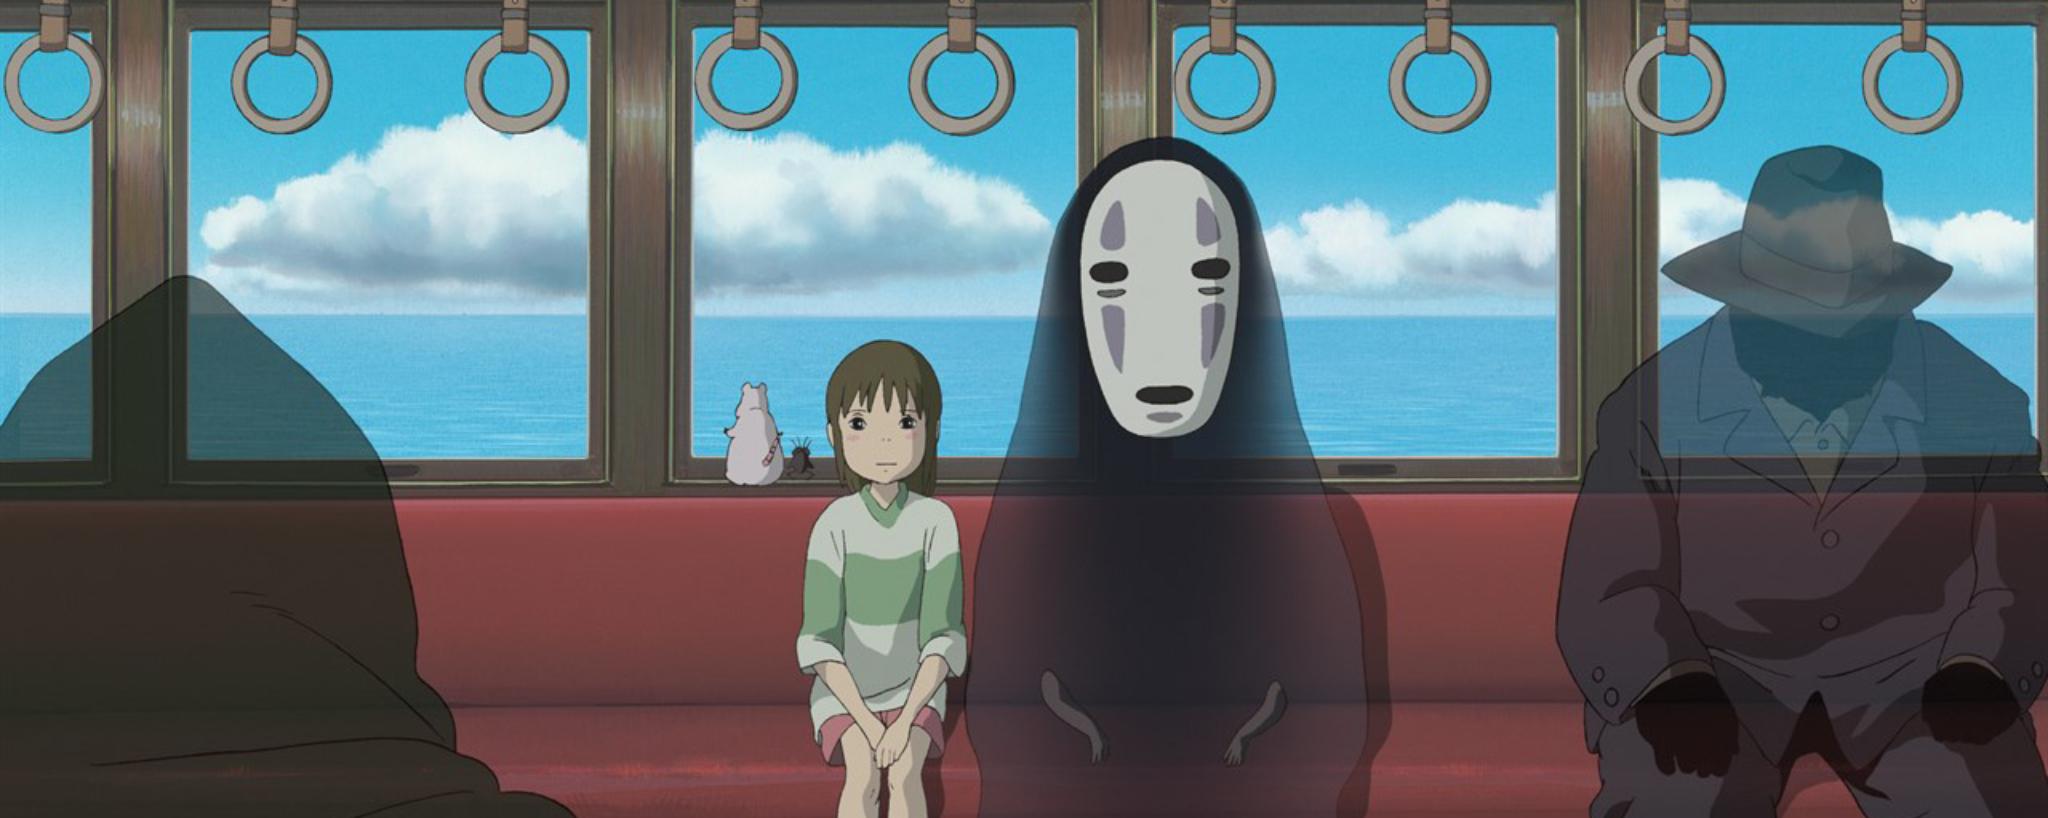 Chihiro and No Face on the bus